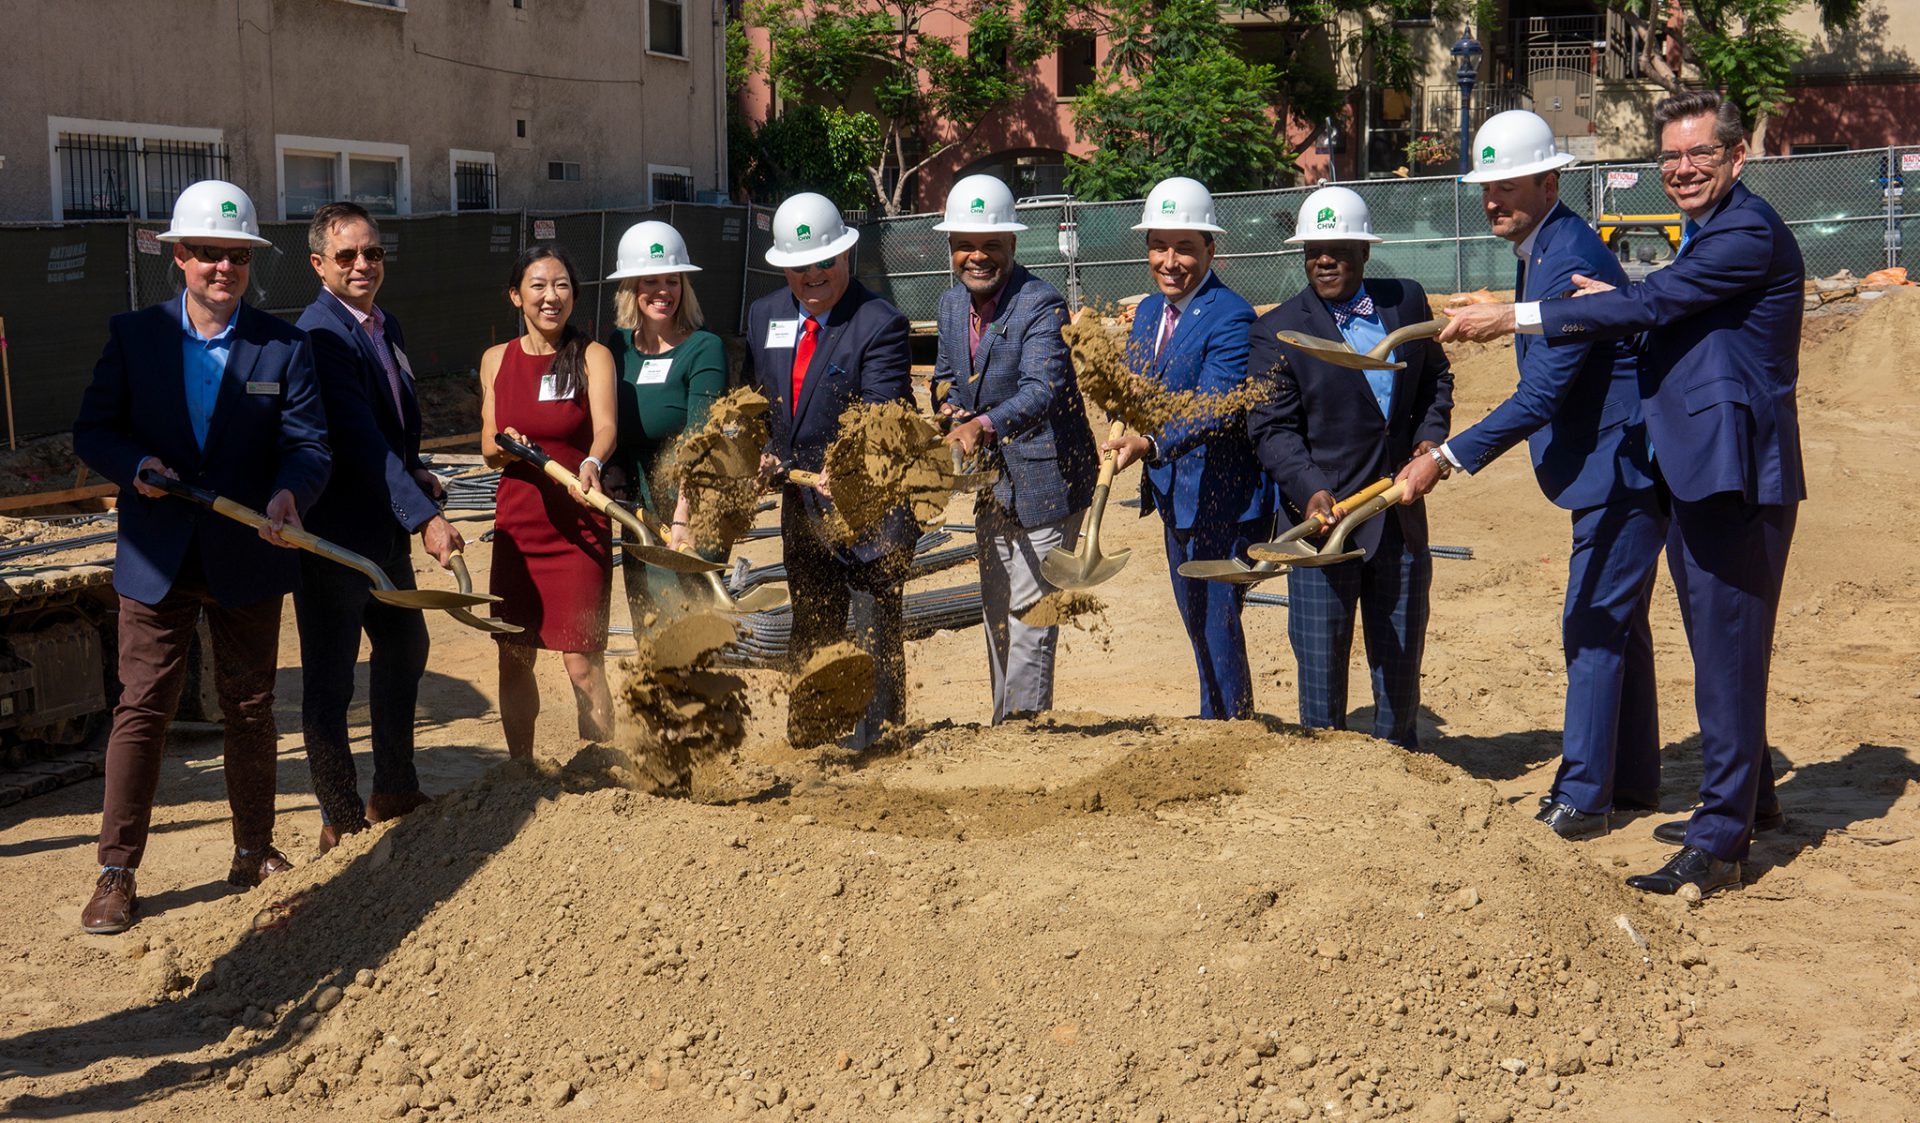 Developer Breaks Ground for Construction of 87 New Affordable Rental Apartments in Downtown San Diego